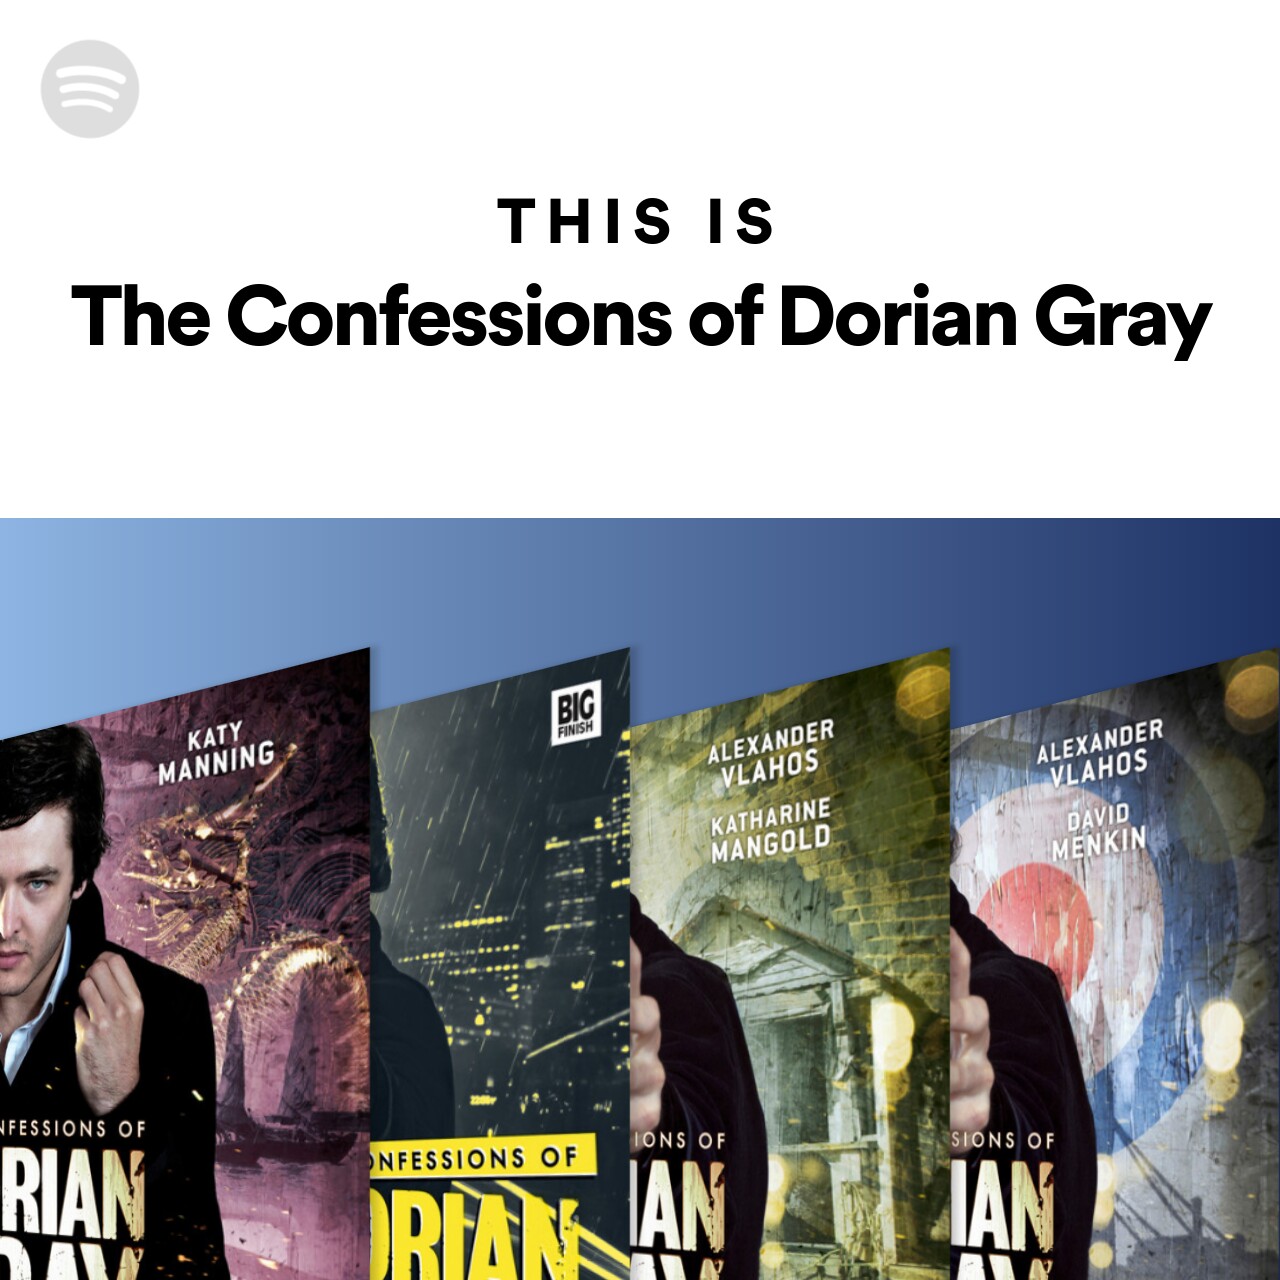 This Is The Confessions of Dorian Gray